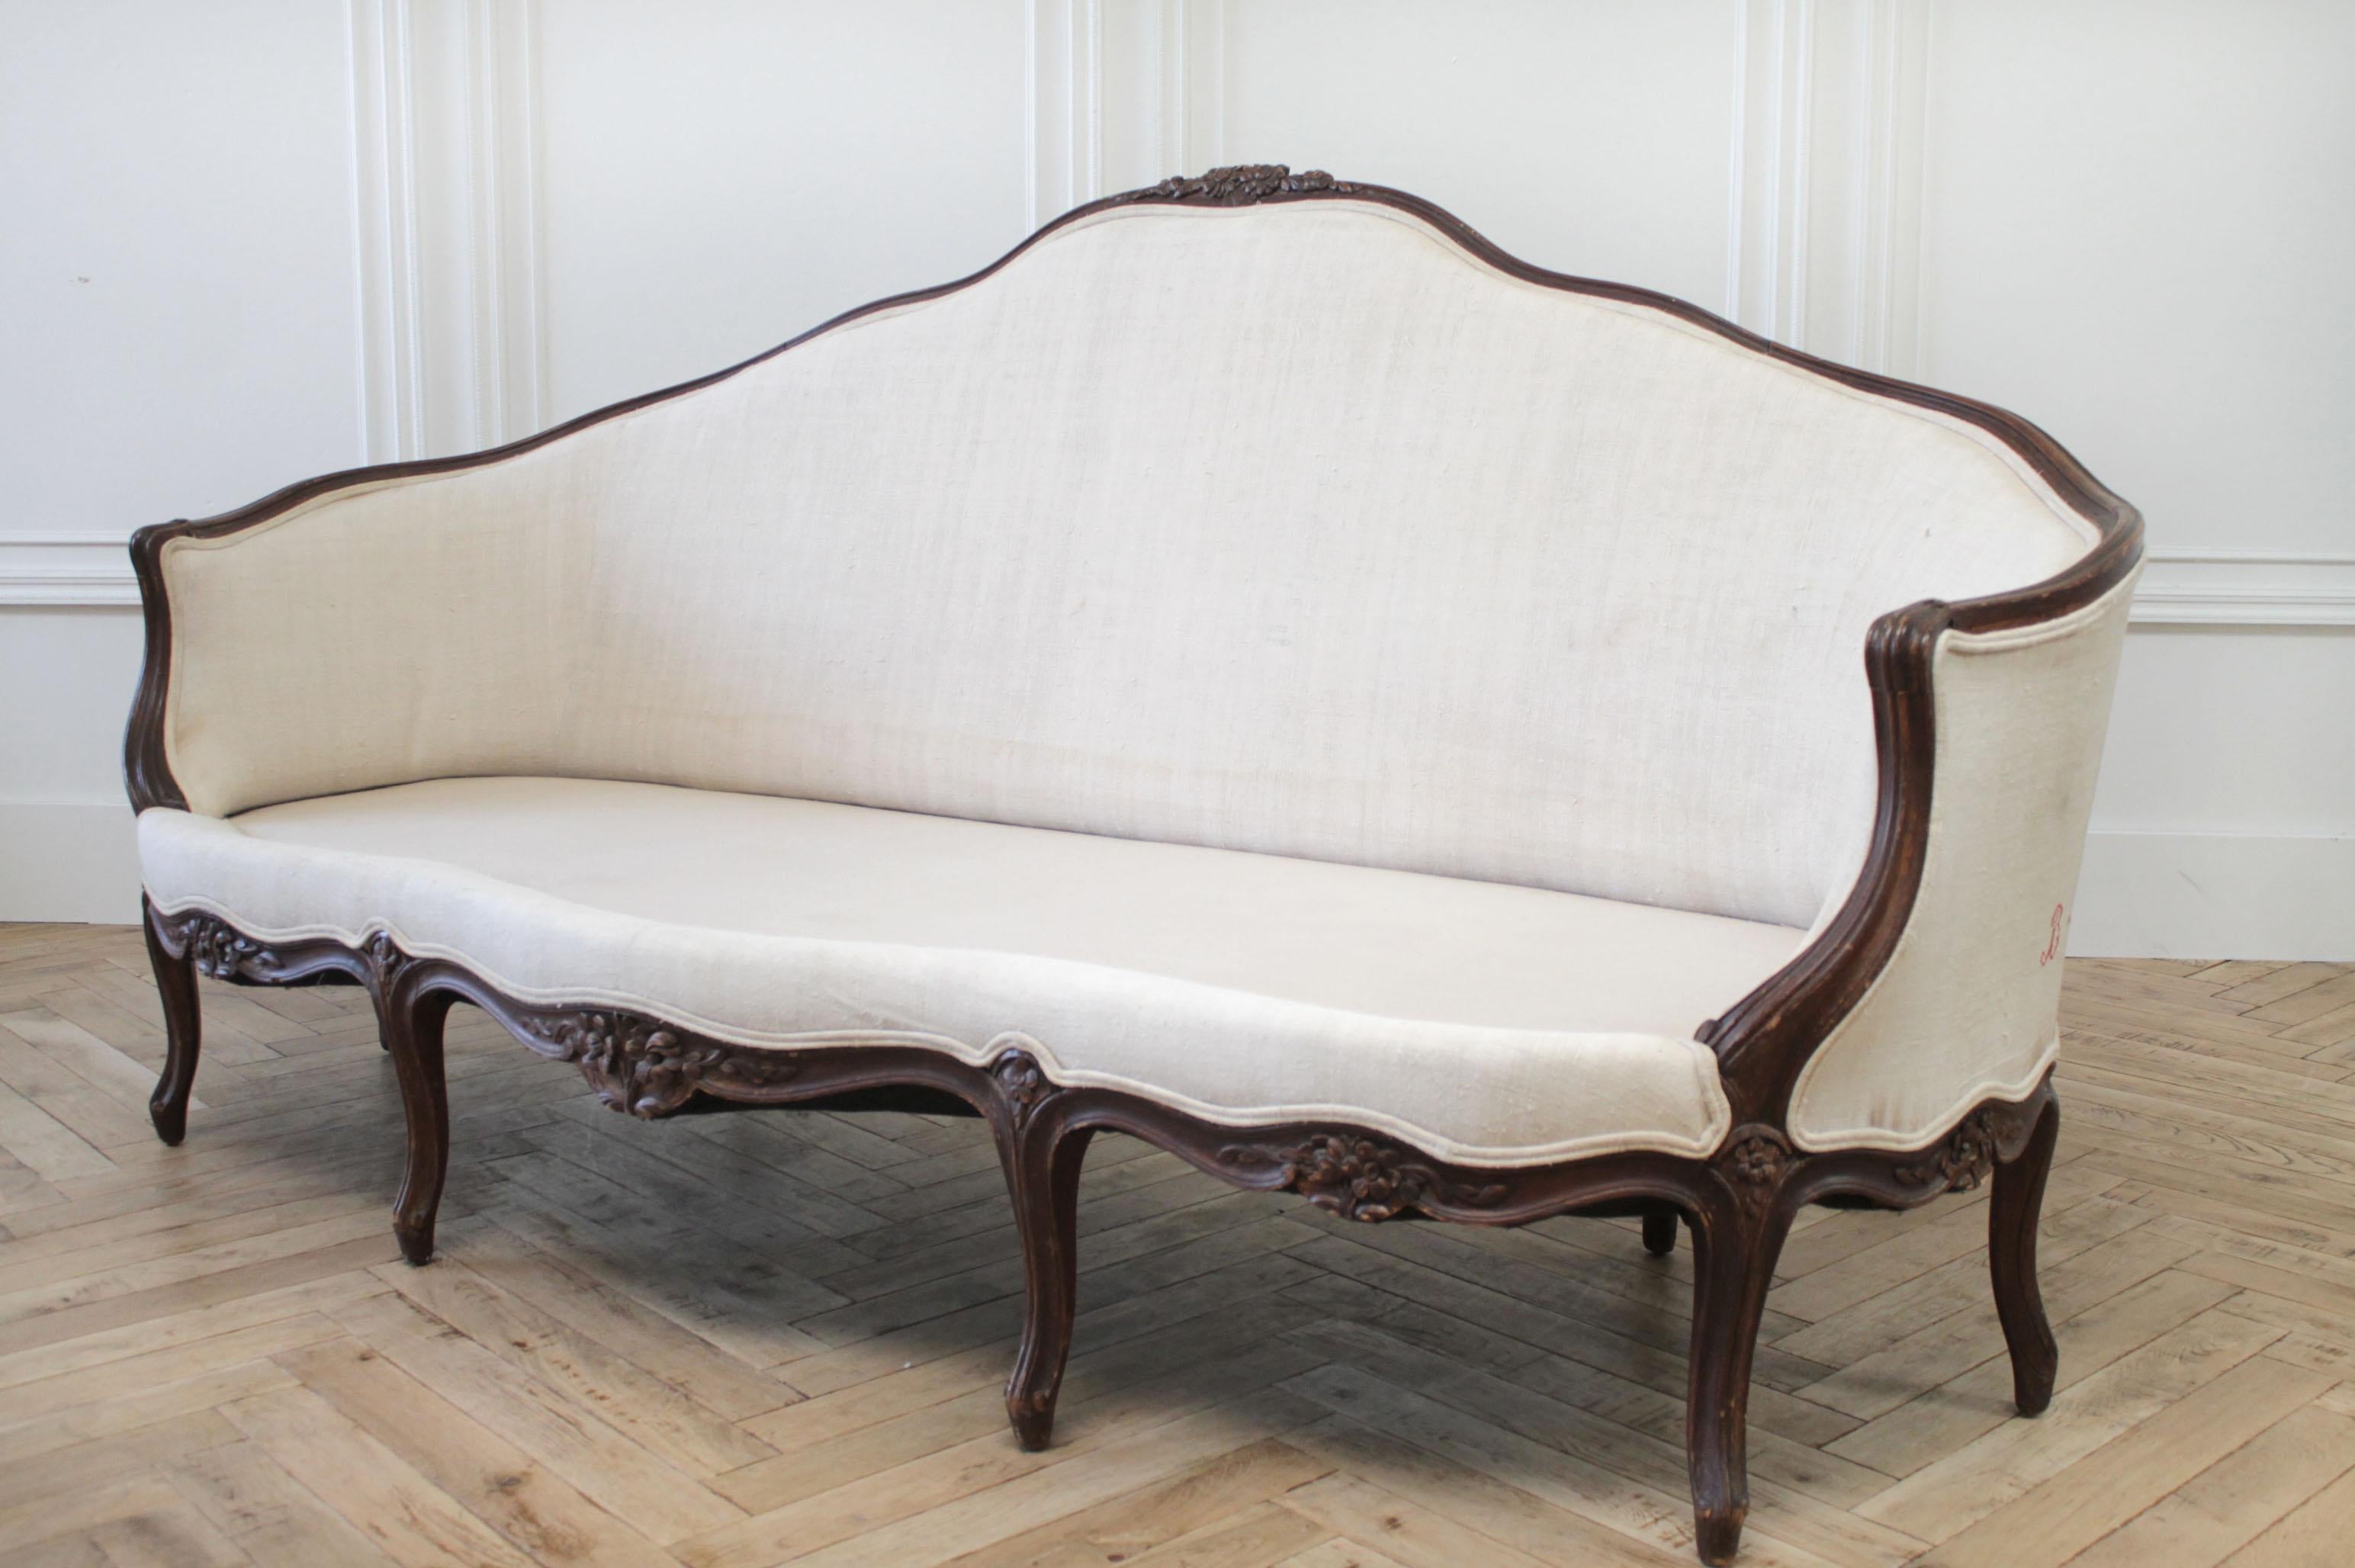 Late 19th Century Carved Walnut Sofa with Antique French Grainsack Upholstery 9